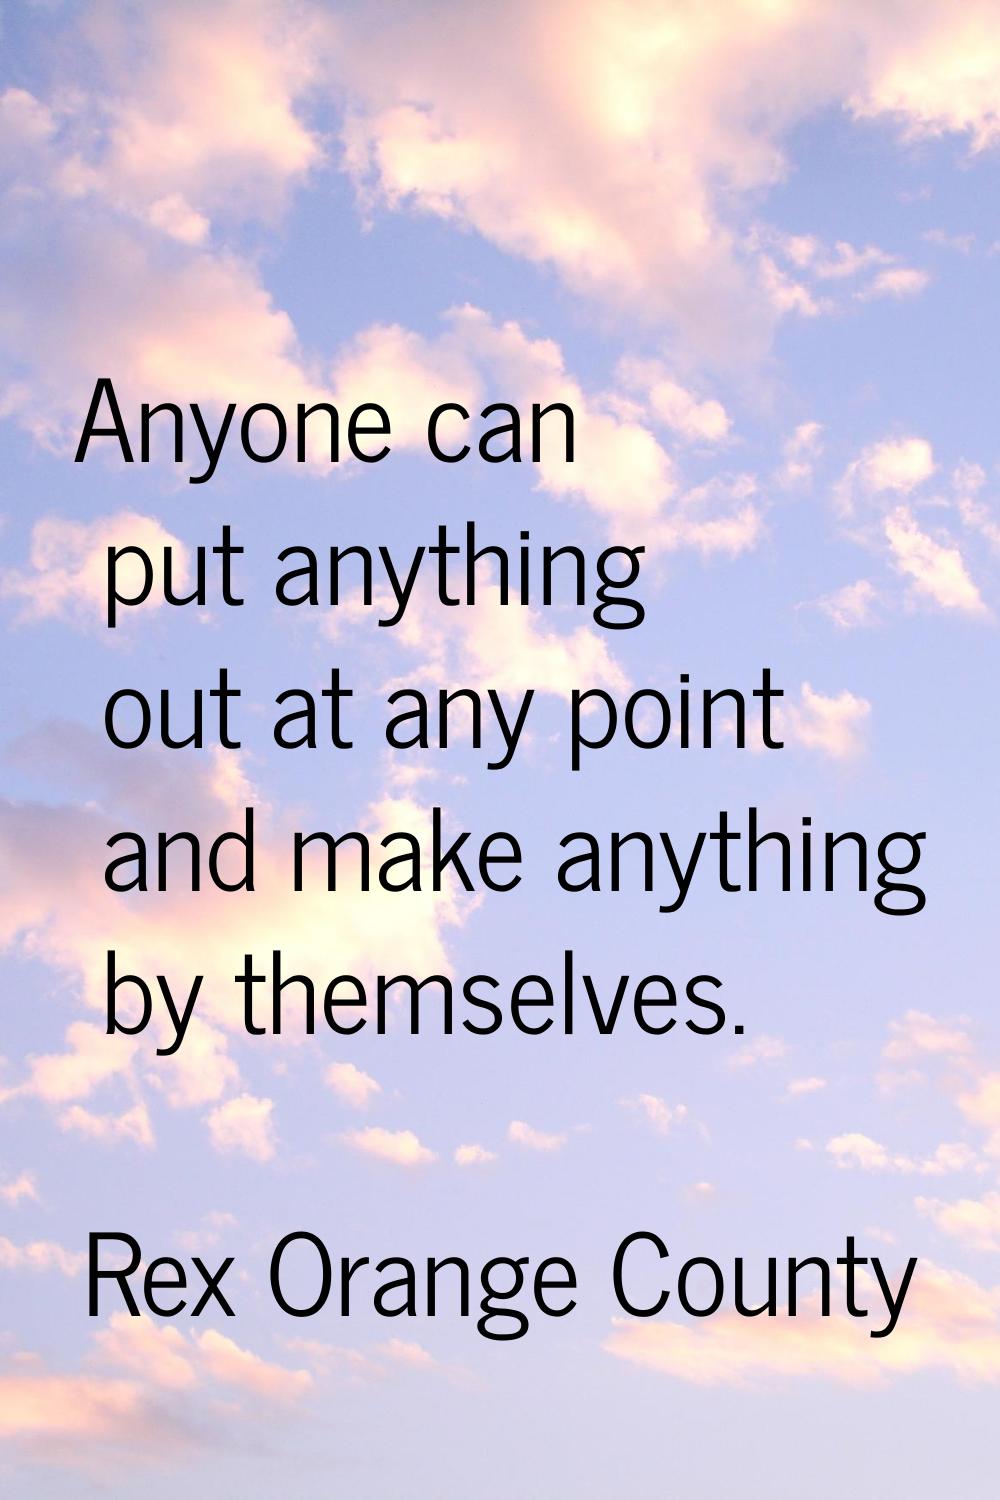 Anyone can put anything out at any point and make anything by themselves.